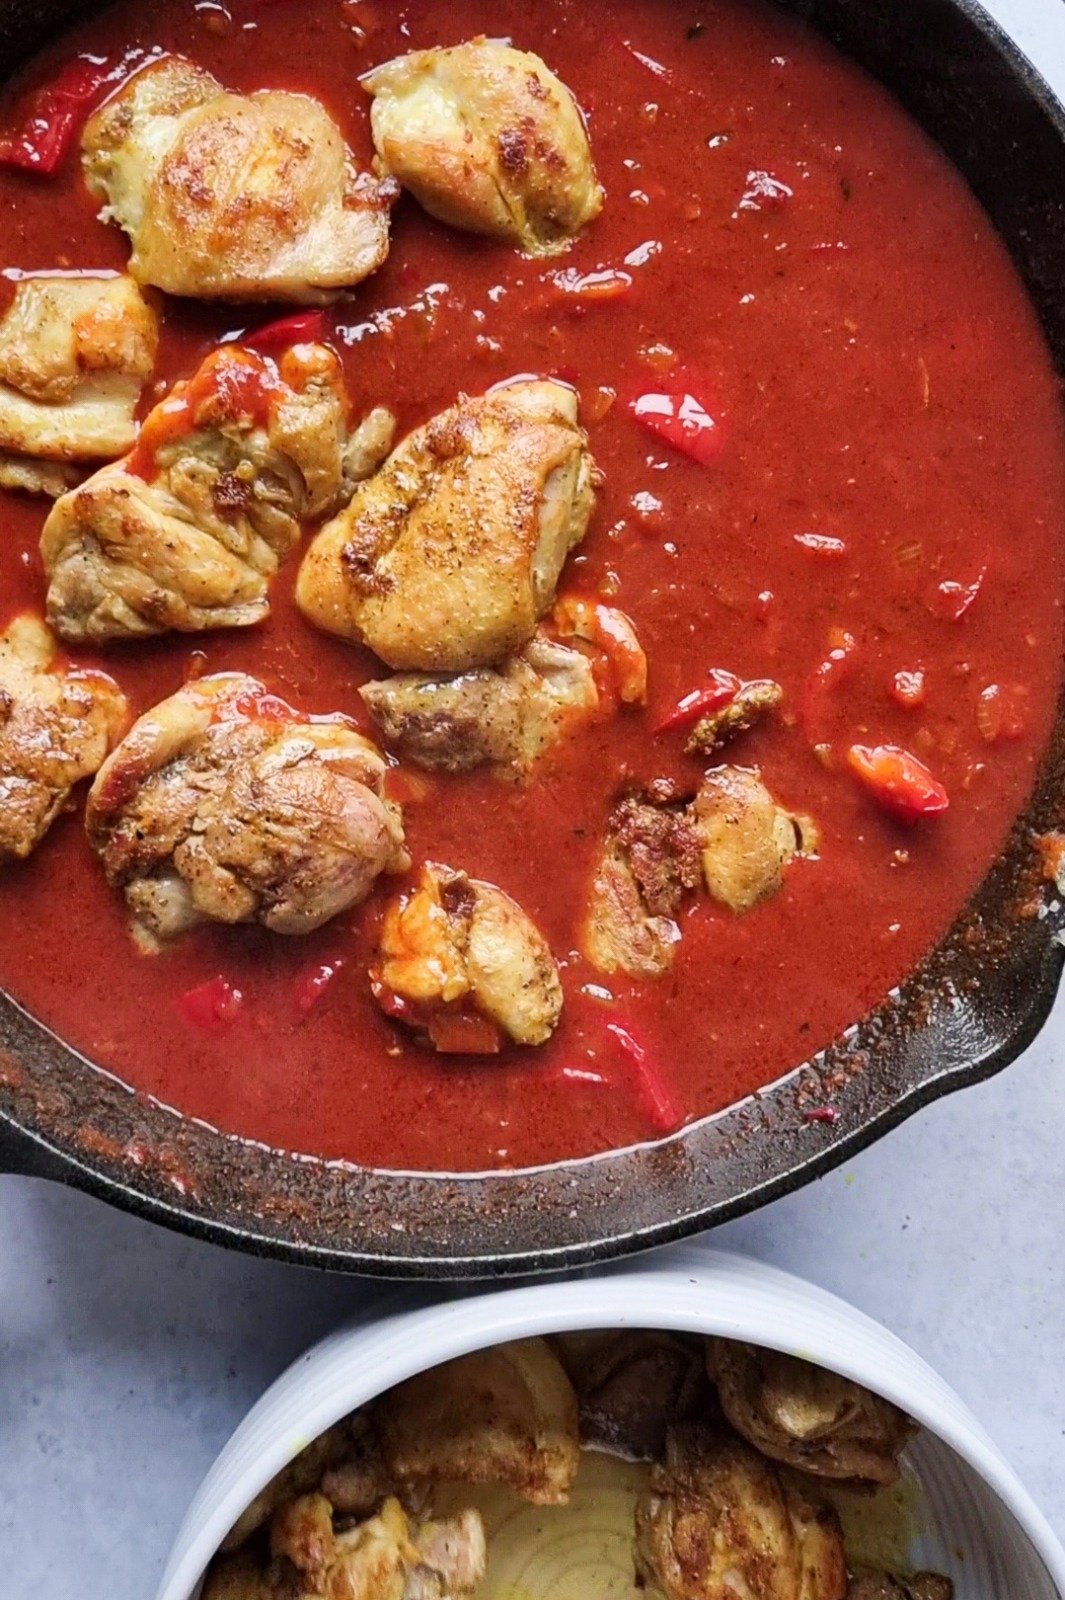 Gently place the chicken pieces back into the sauce to cook well.